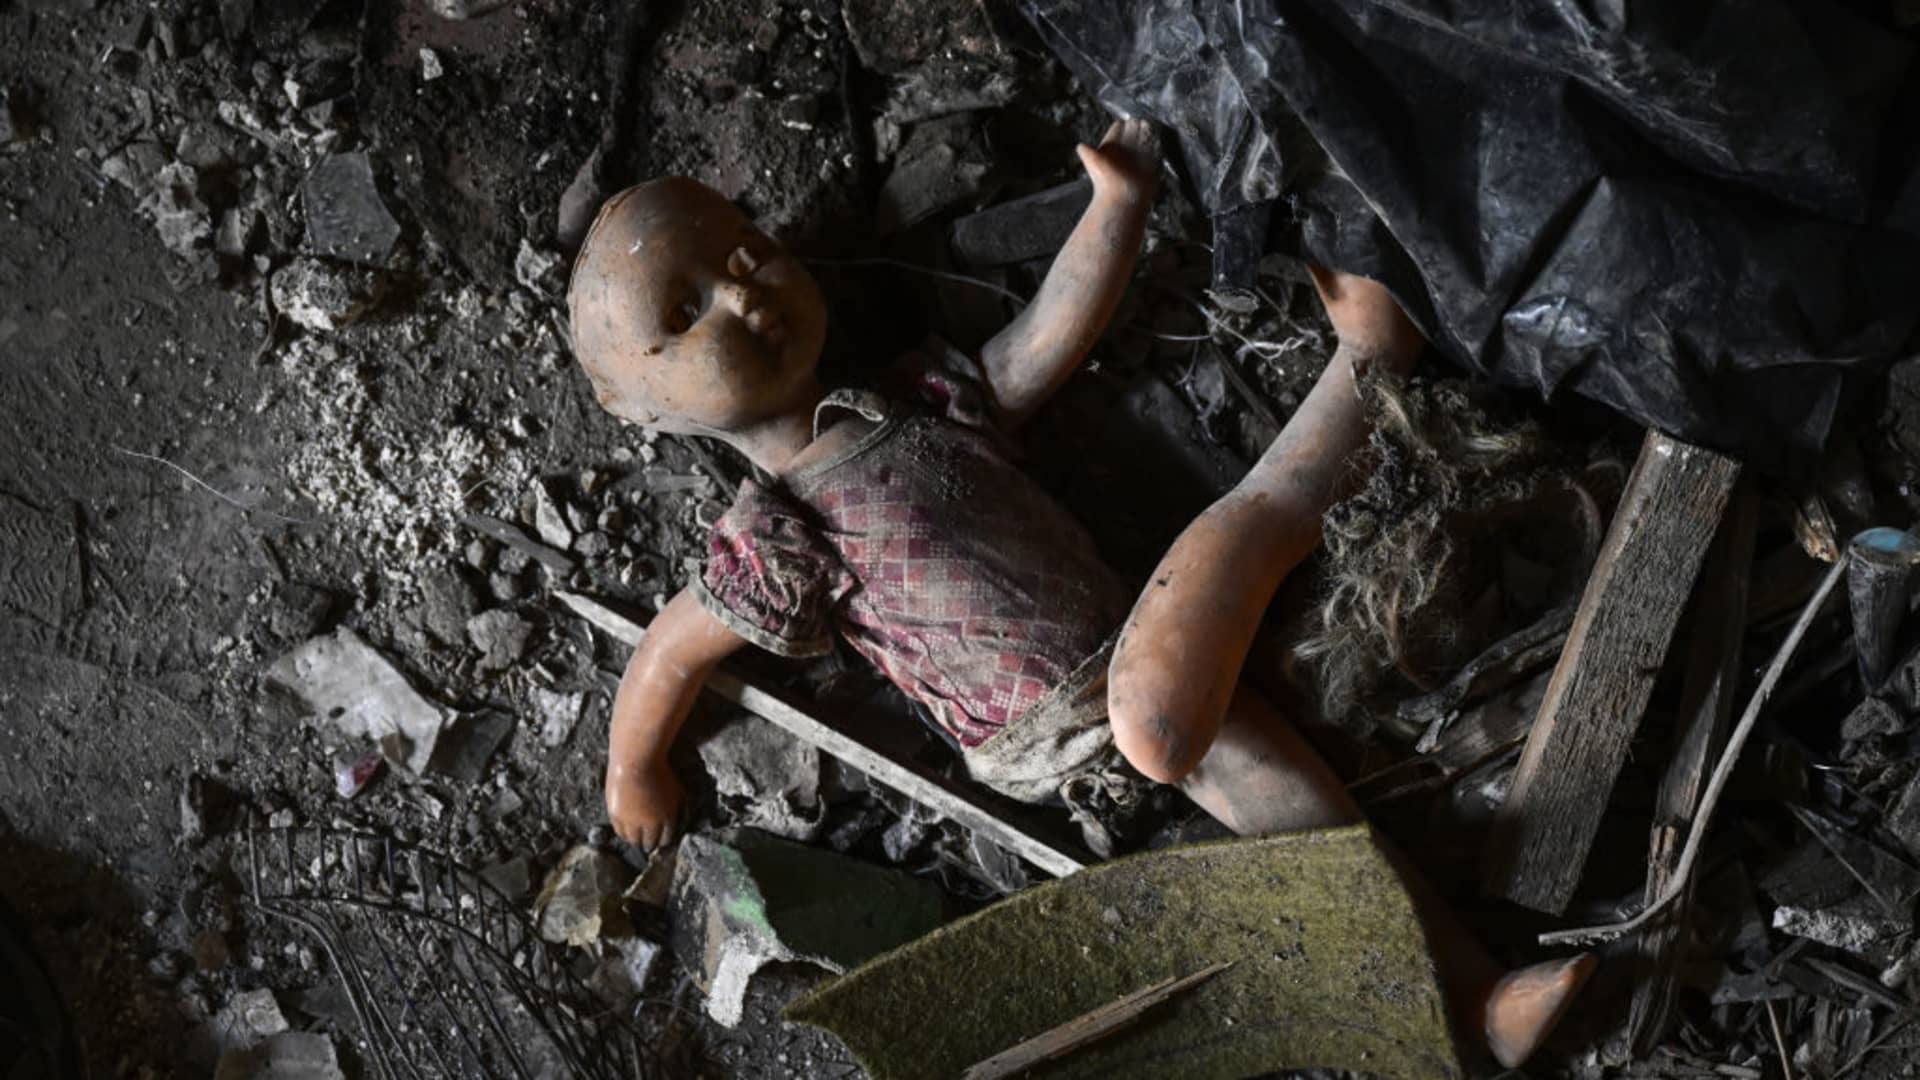 A doll is seen inside the damaged building after Russian attacks in Zaporizhzhia, Ukraine on March 22, 2023.